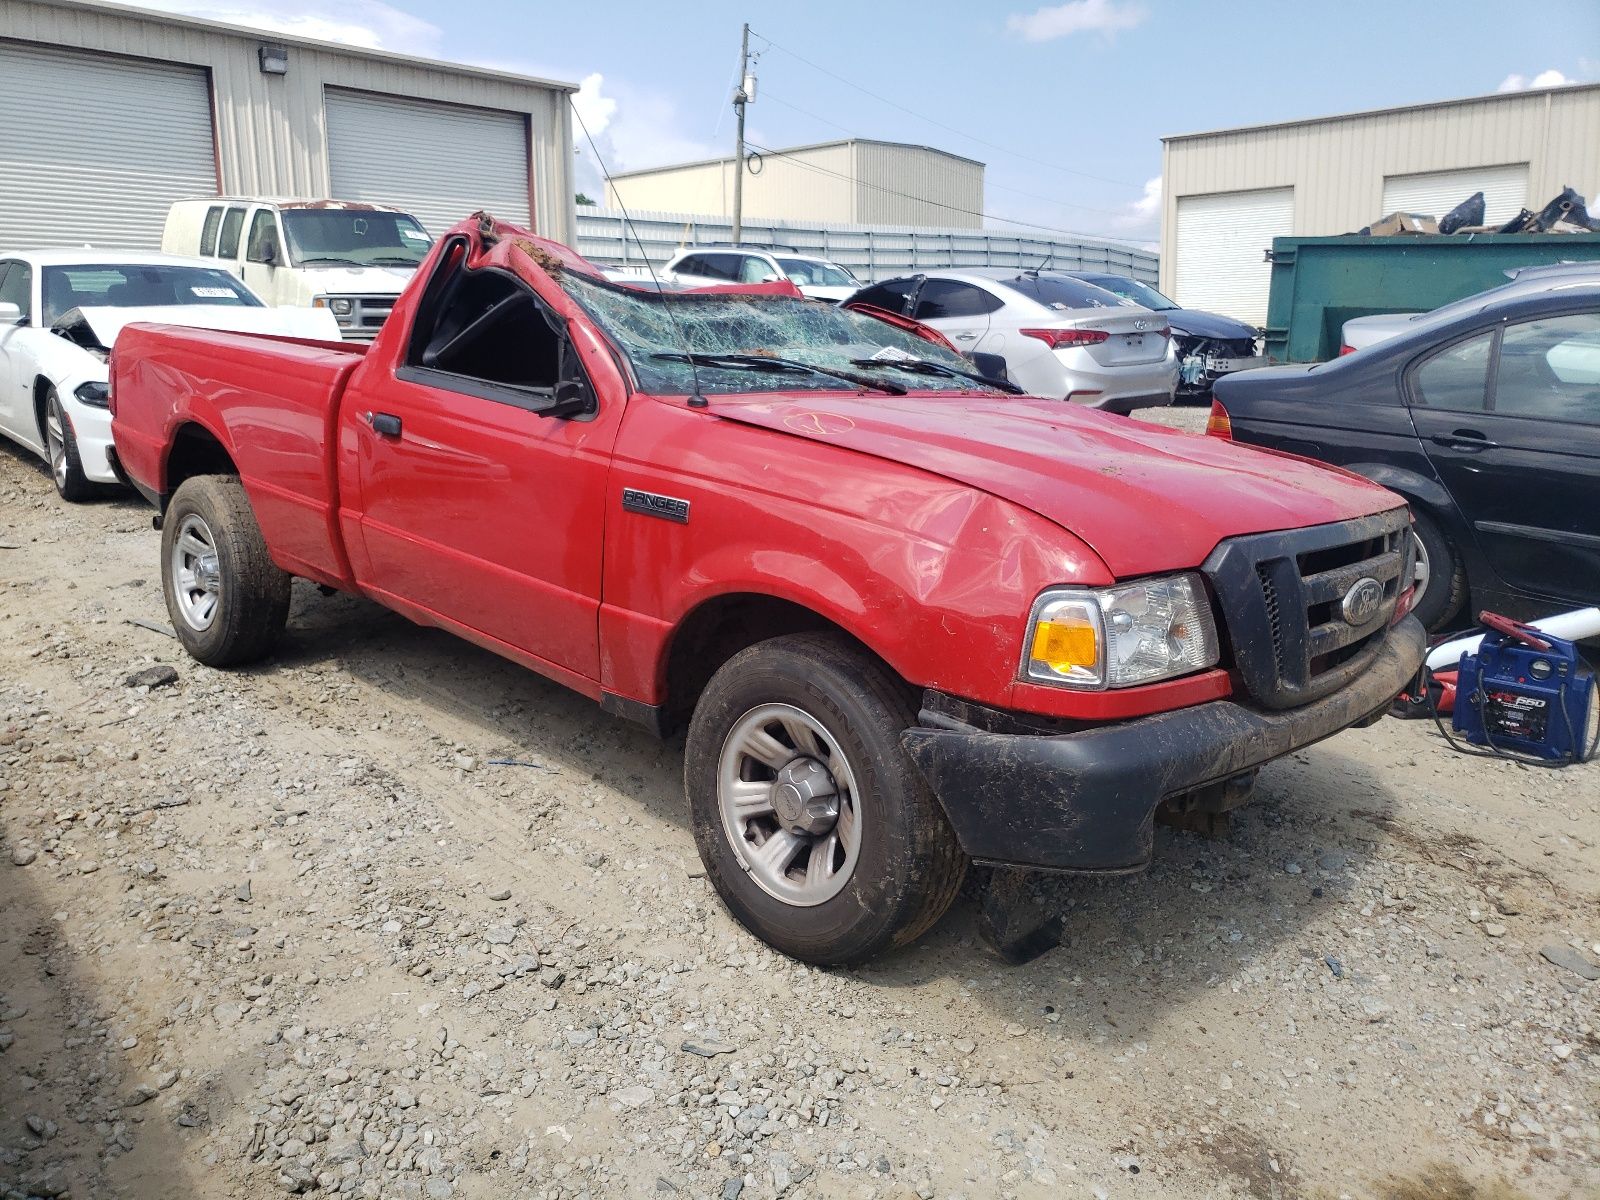 1 of 1FTYR10DX8PA88530 Ford Ranger 2008